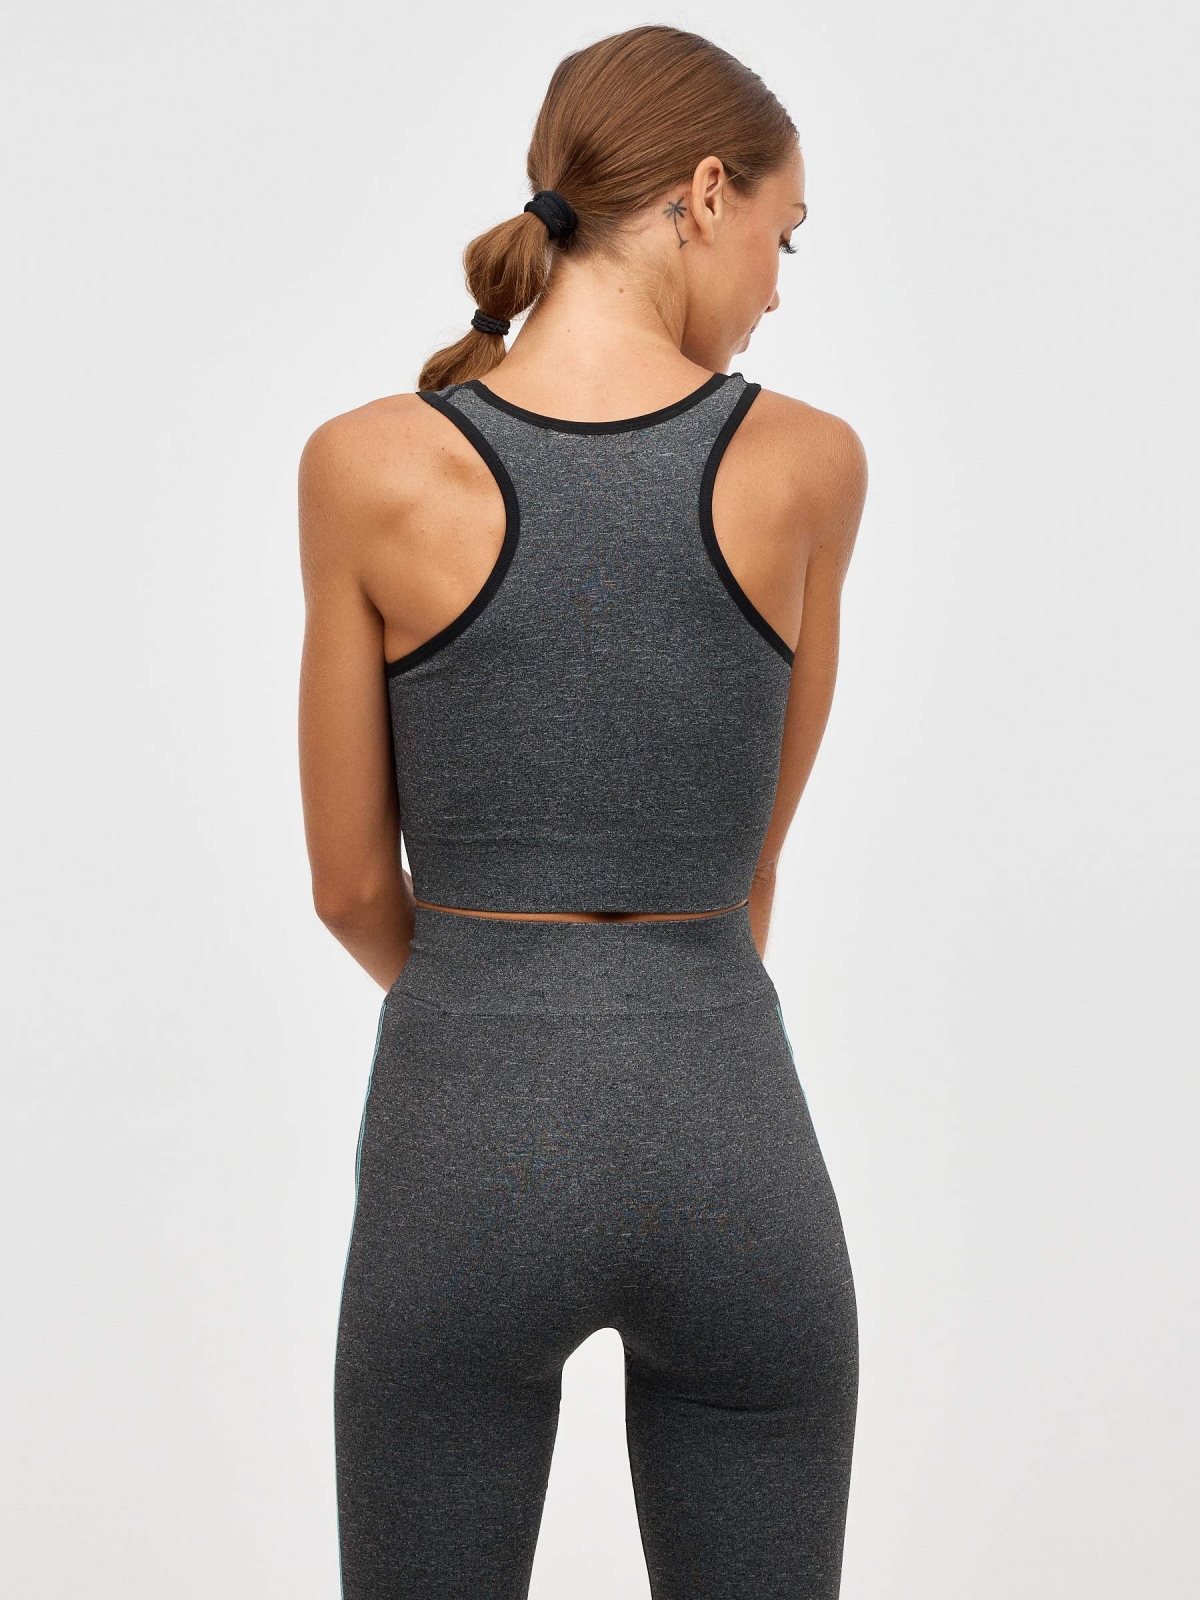 Seamless top dark grey middle back view